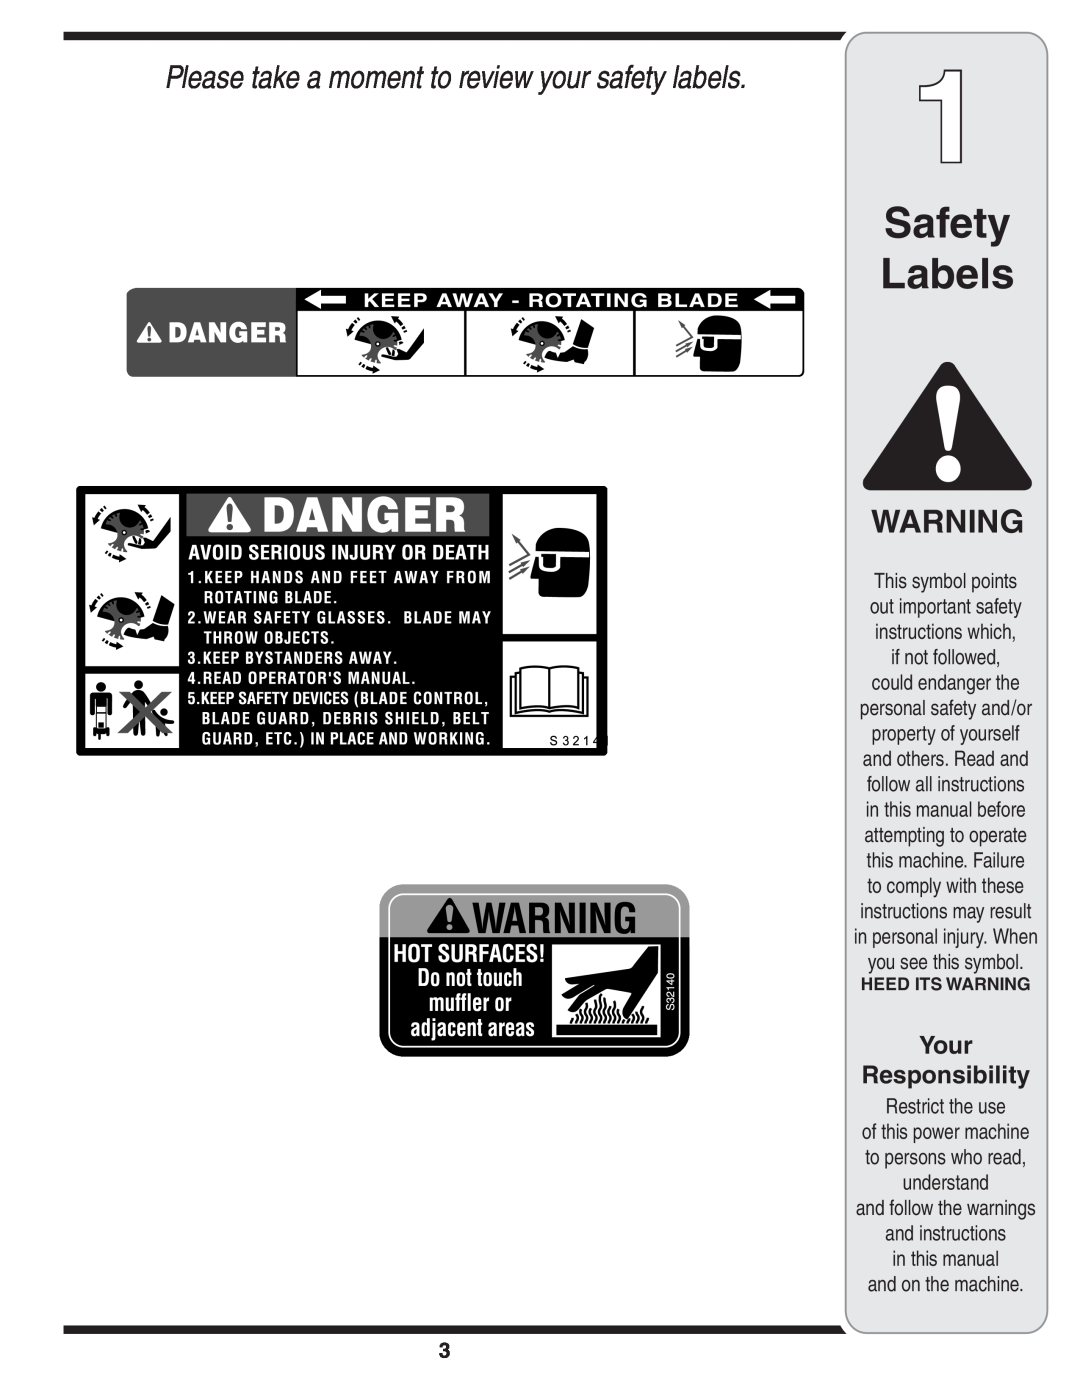 MTD Series 521 warranty Safety Labels, Your Responsibility, in personal injury. When you see this symbol, Restrict the use 